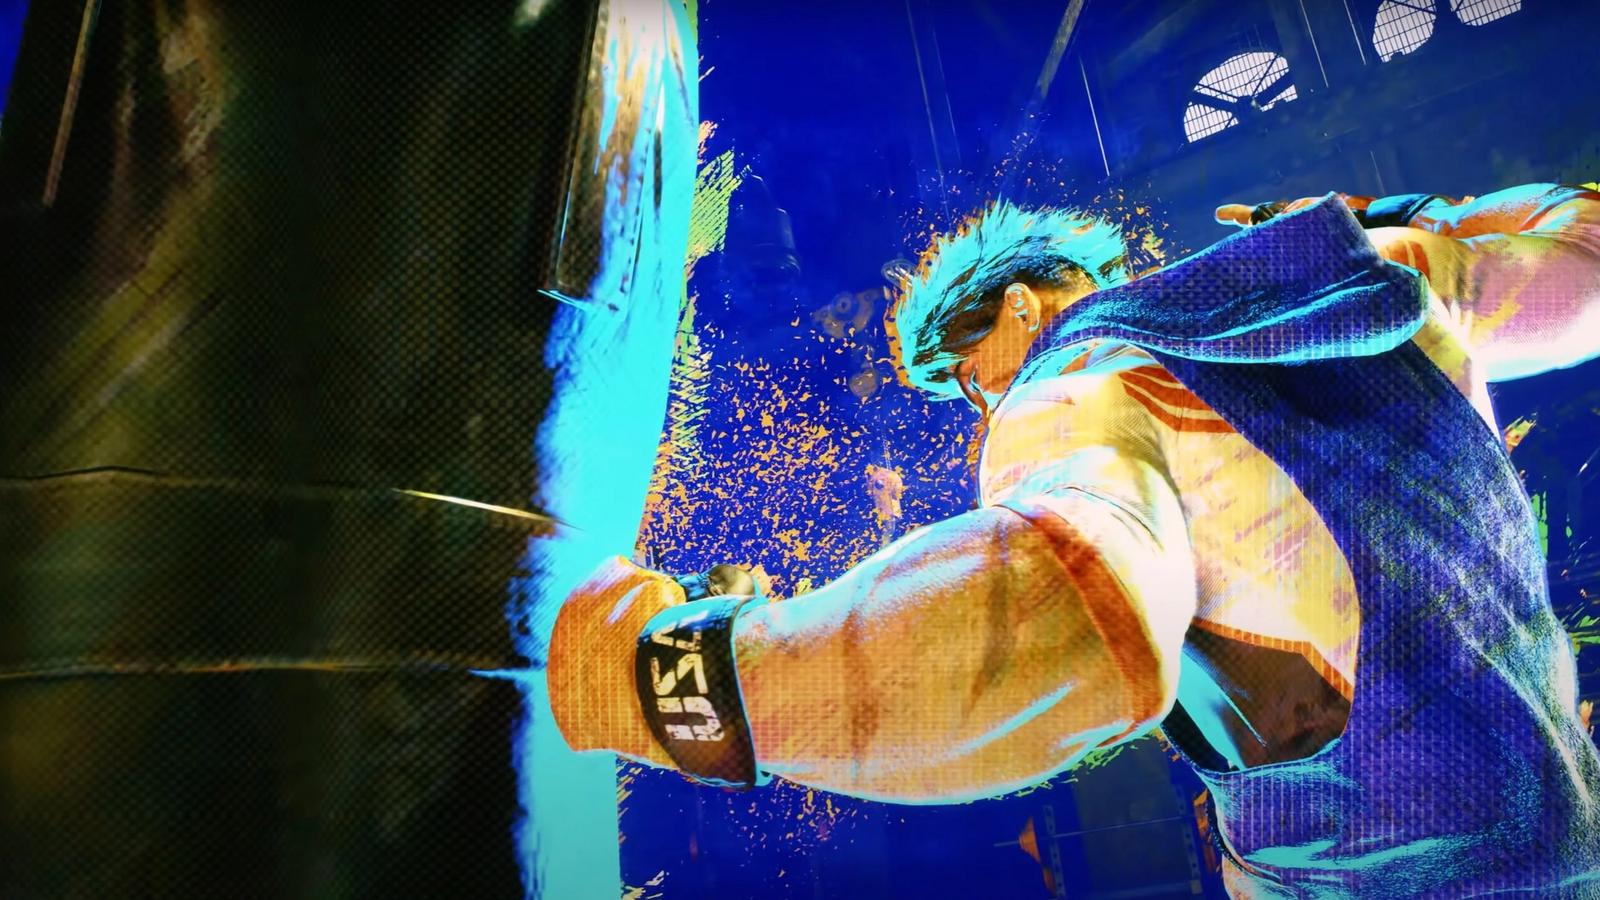 Ryu hits punching bag during Street Fighter 6 trailer.